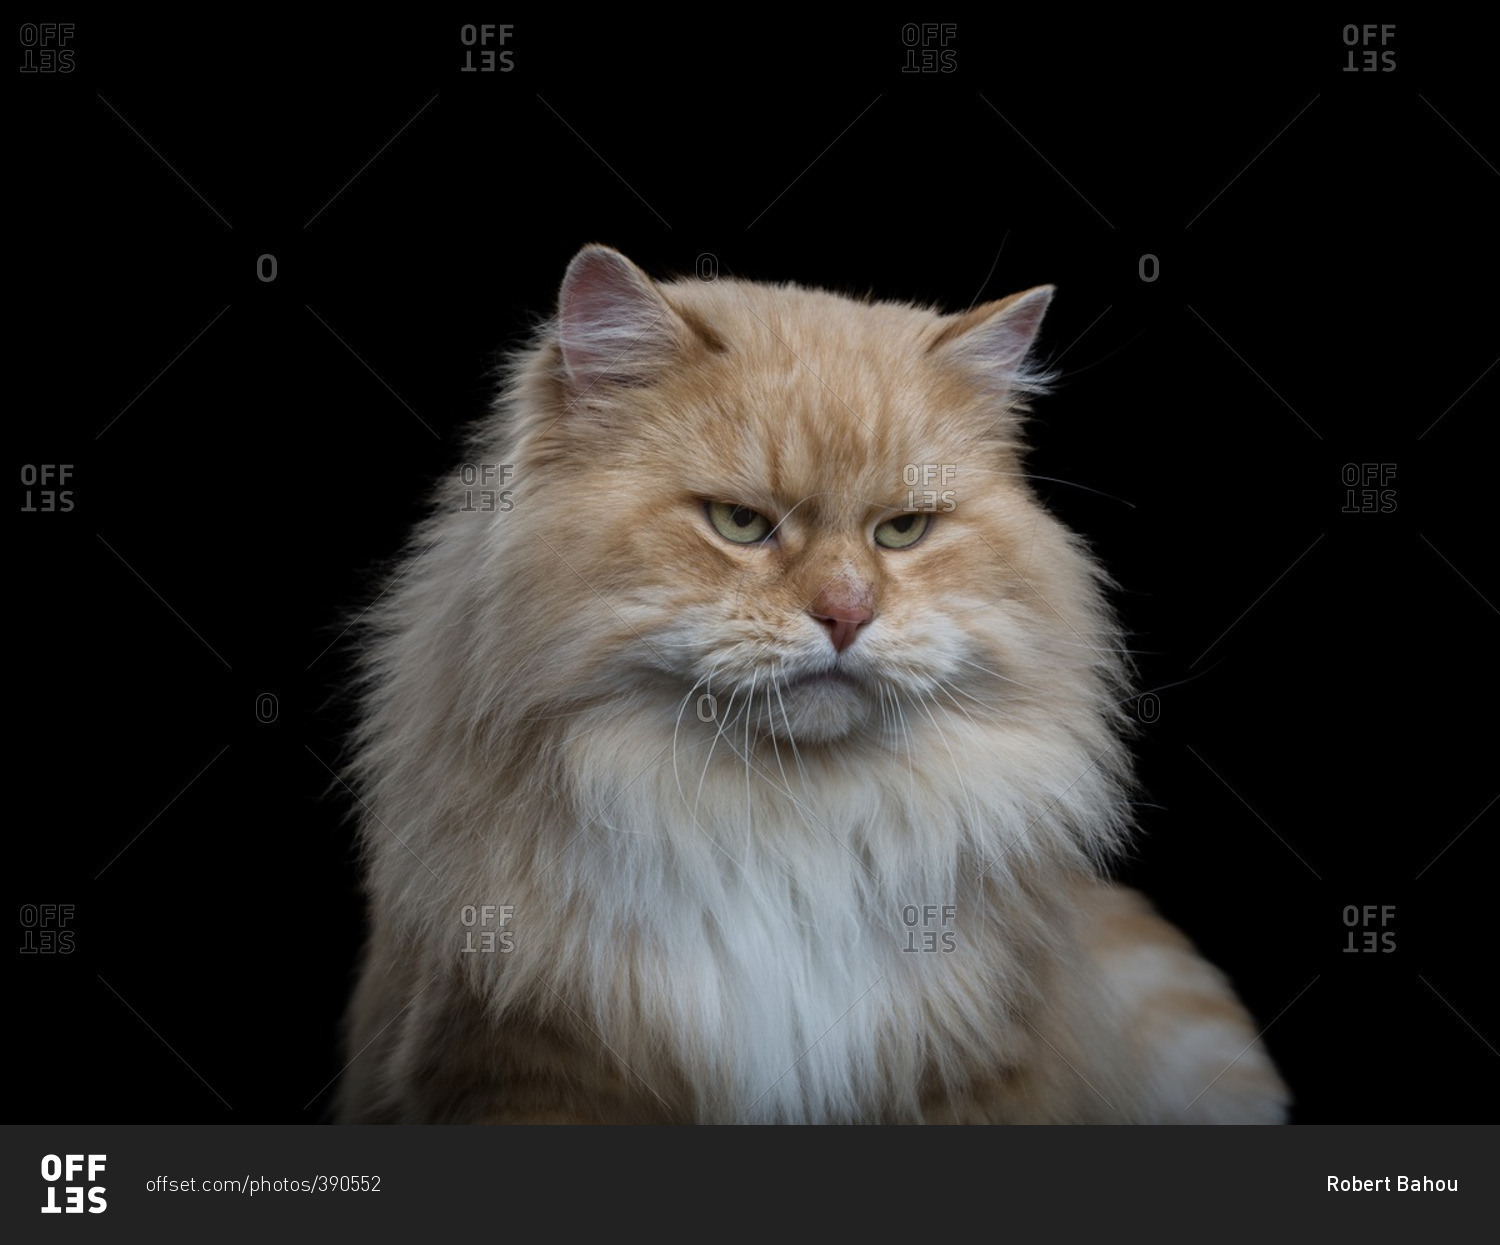 Portrait of an angry fluffy orange cat